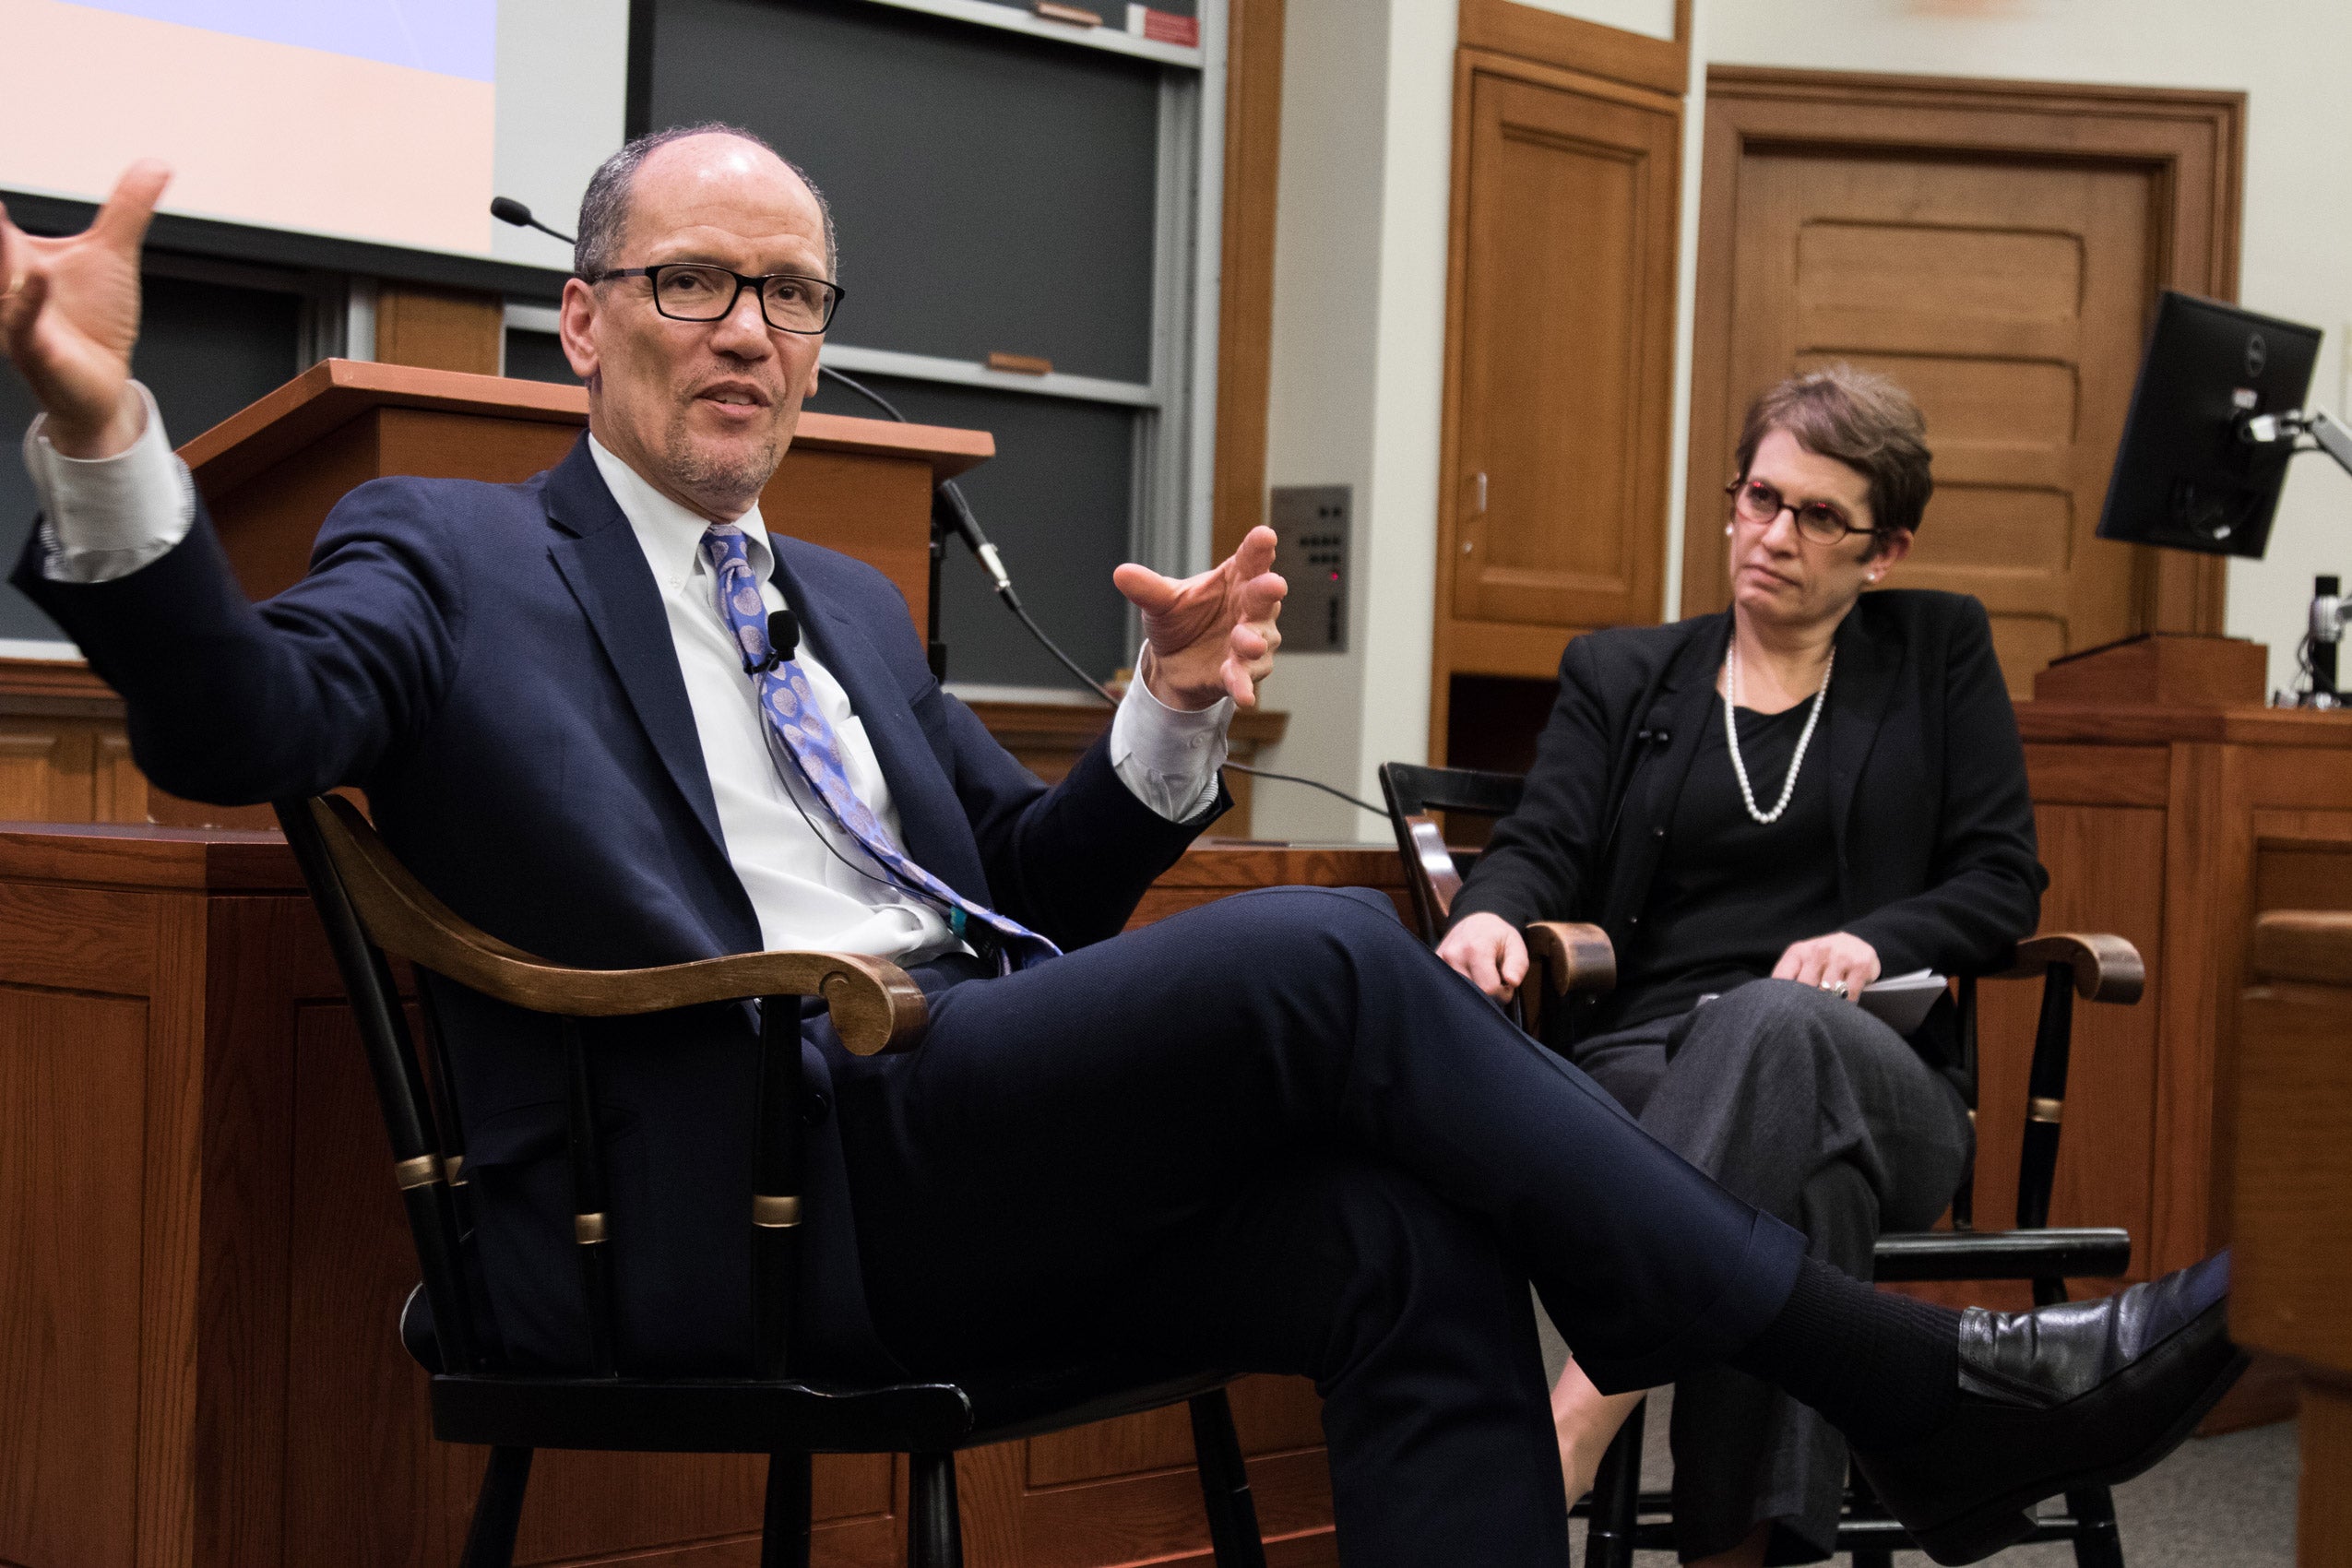 Former Labor Secretary Perez says everyone should have a seat at the table 4